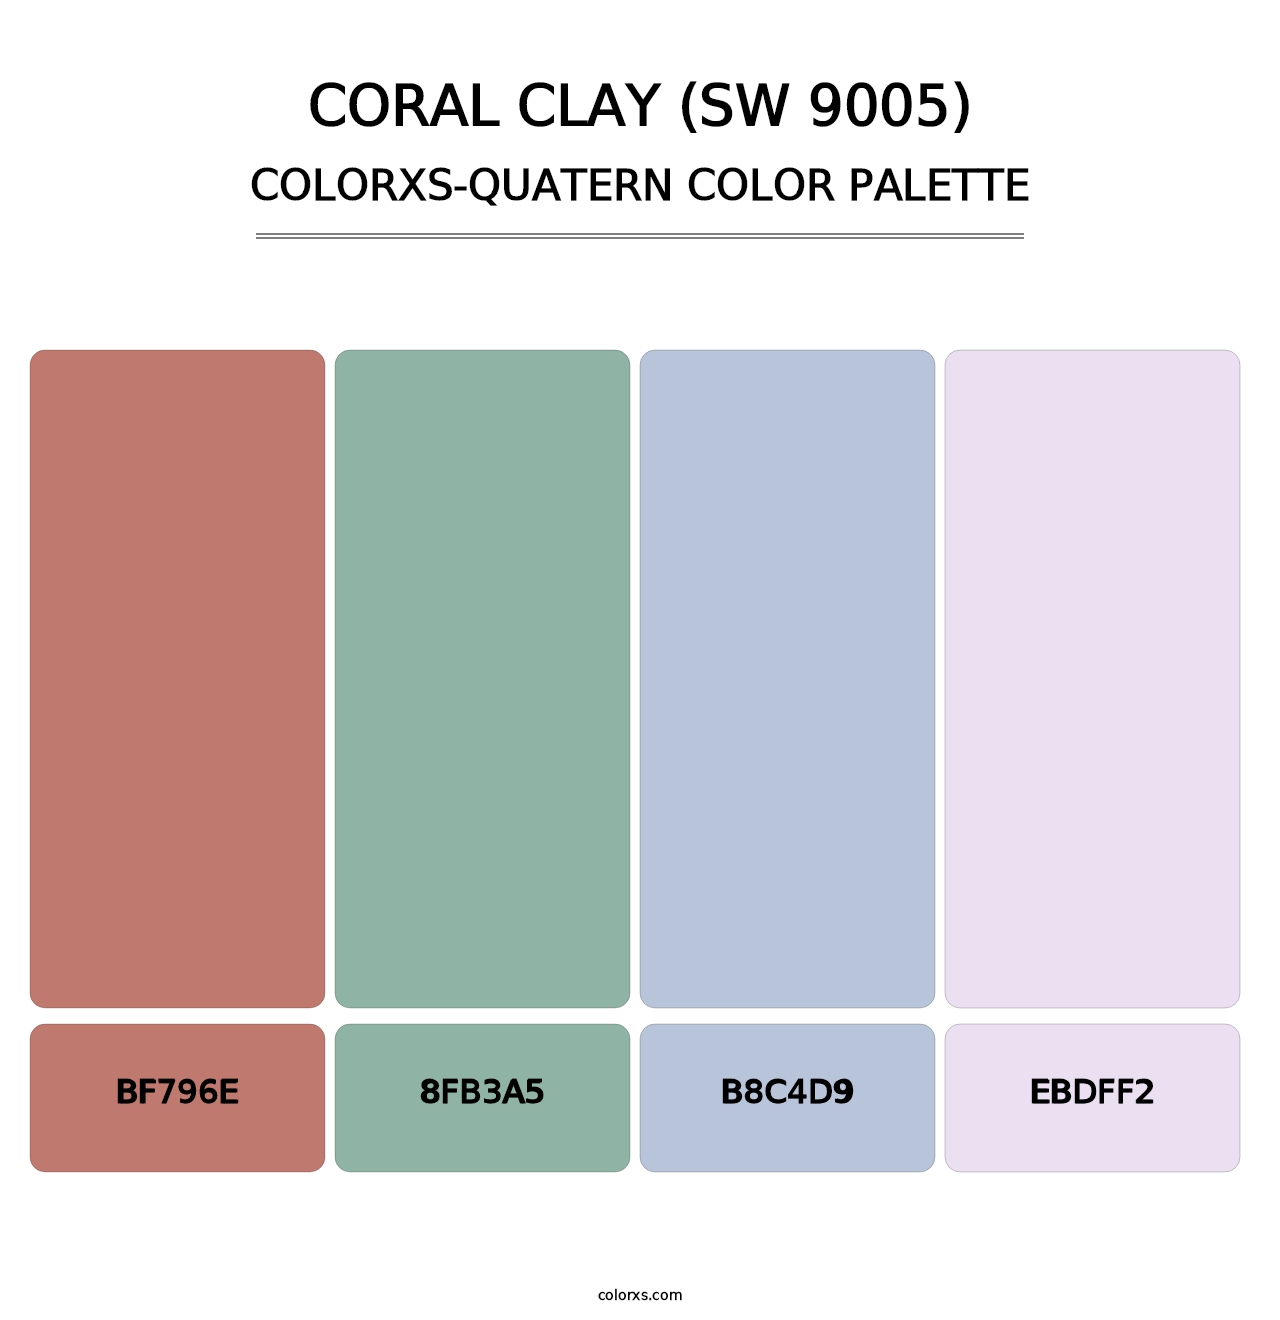 Coral Clay (SW 9005) - Colorxs Quatern Palette